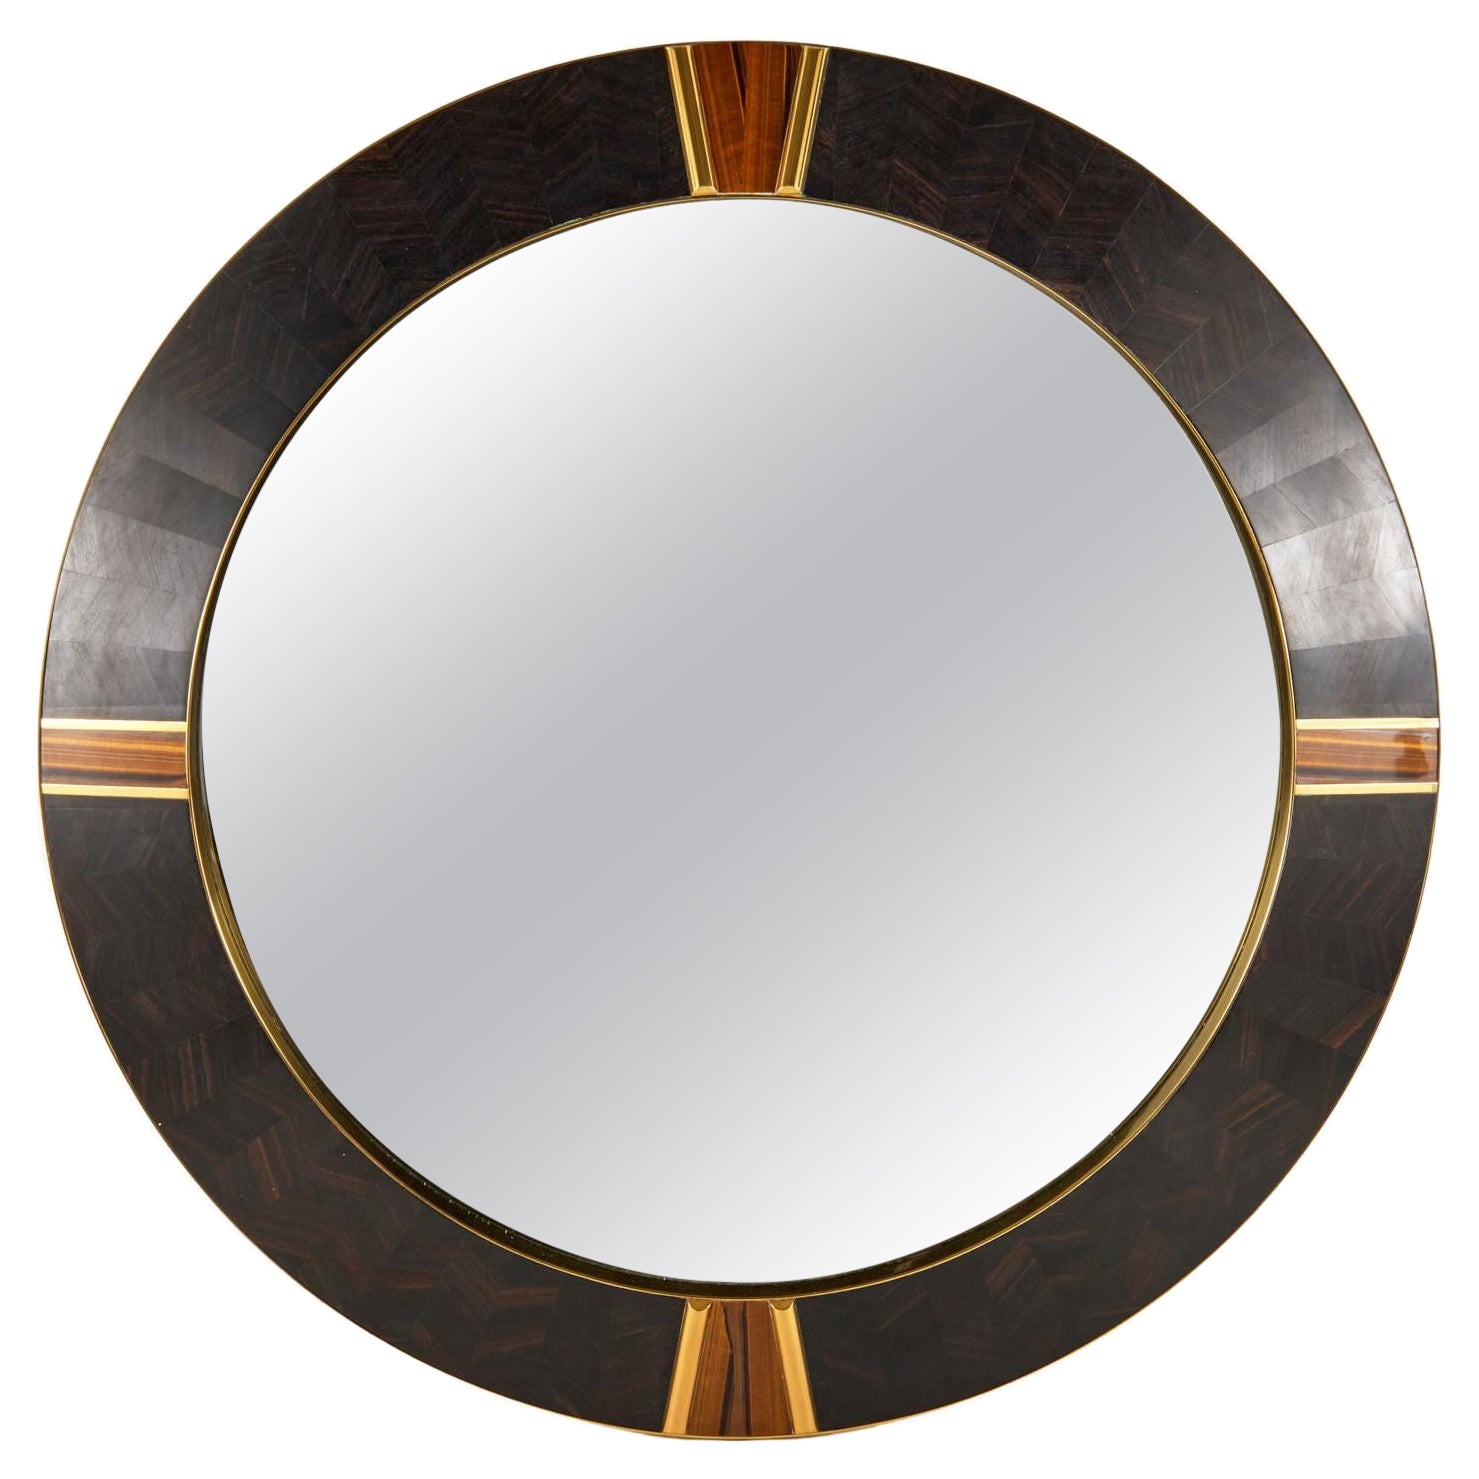 Important Modernist Circular Mirror Inlaid with Tiger Eye Stone Details